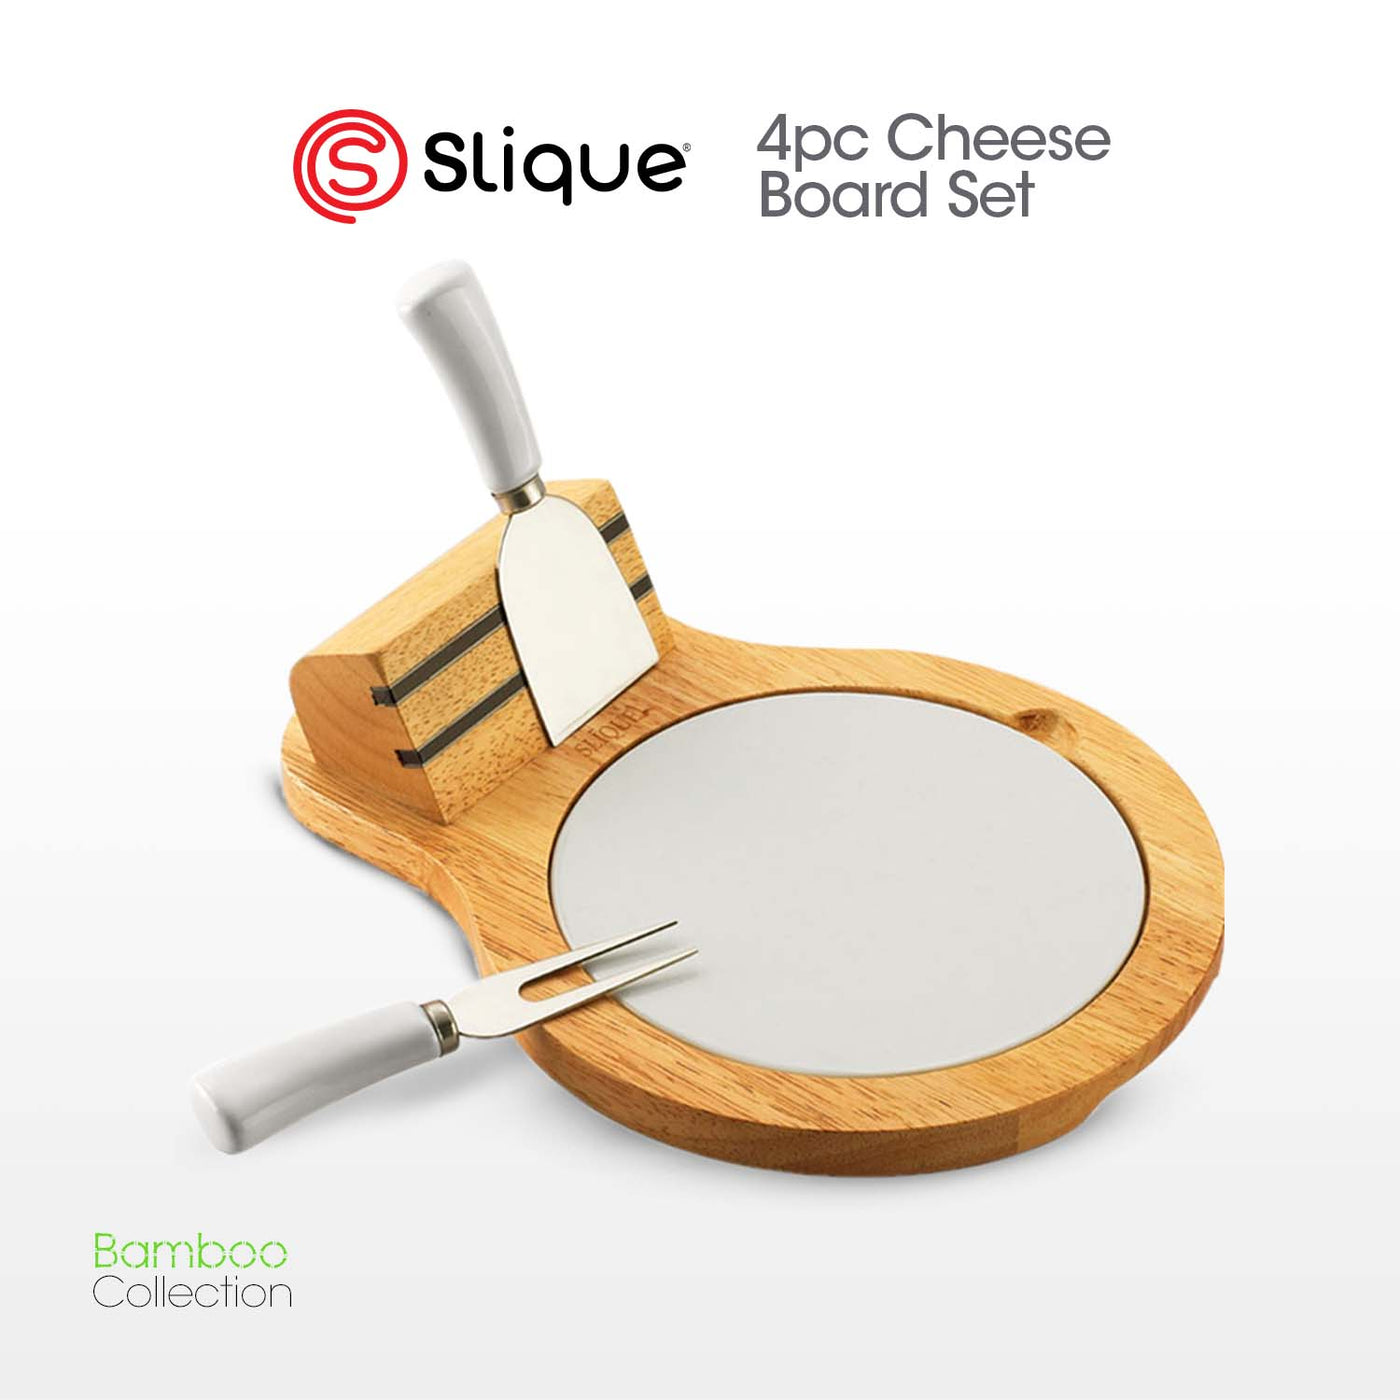 SLIQUE Premium Bamboo Cheese Board and Stainless Steel Cutlery Set of 4